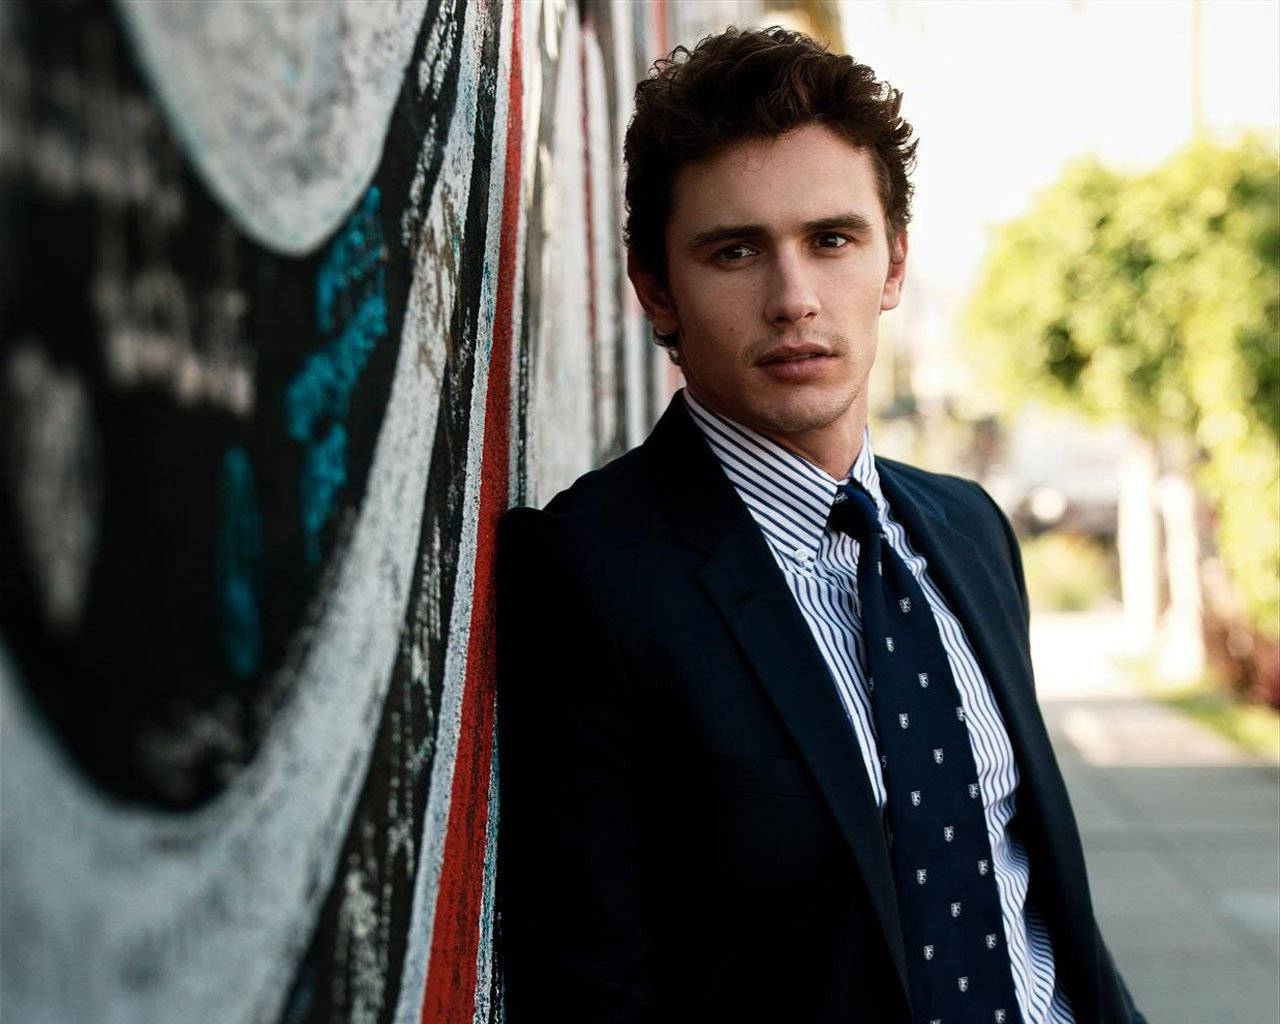 Hollywood Star James Franco Posing During A Street Photoshoot Wallpaper